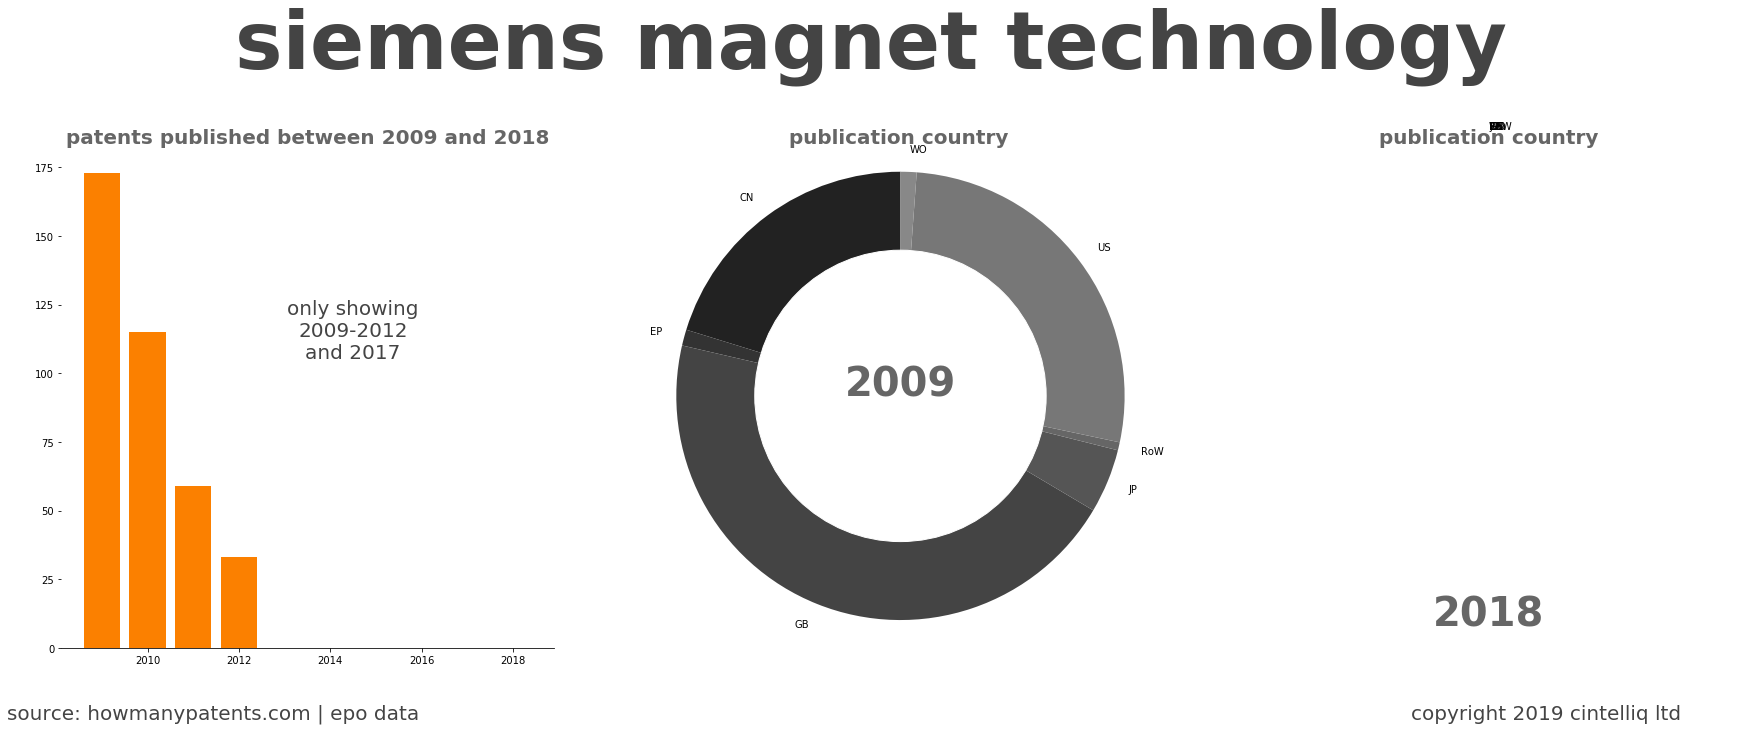 summary of patents for Siemens Magnet Technology